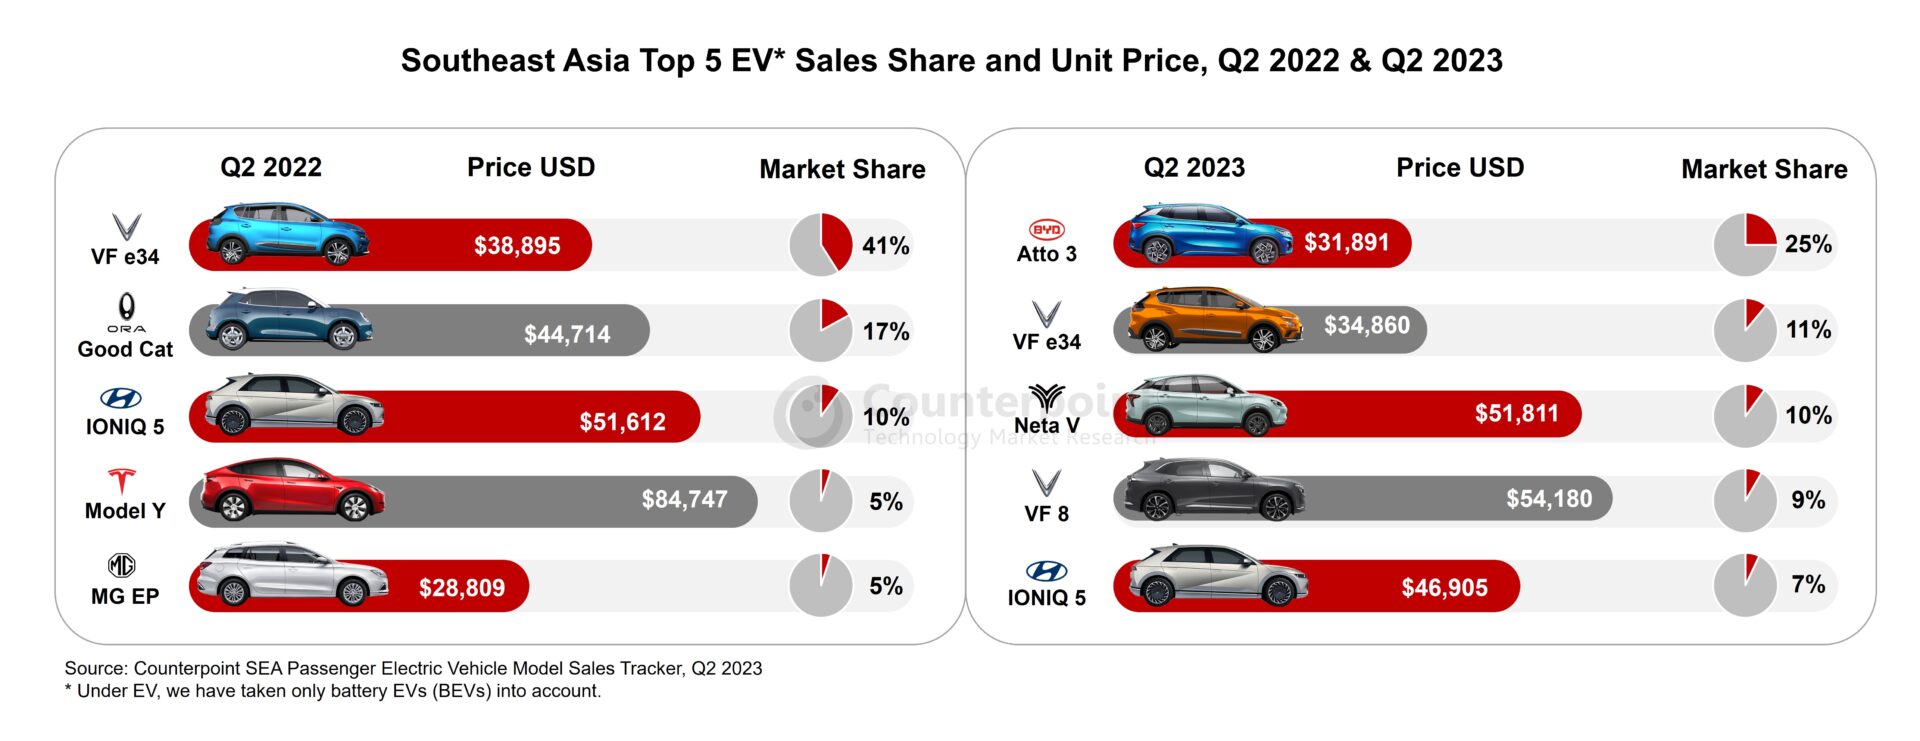 A chart showing SE Asia’s Best-Selling Passenger EVs